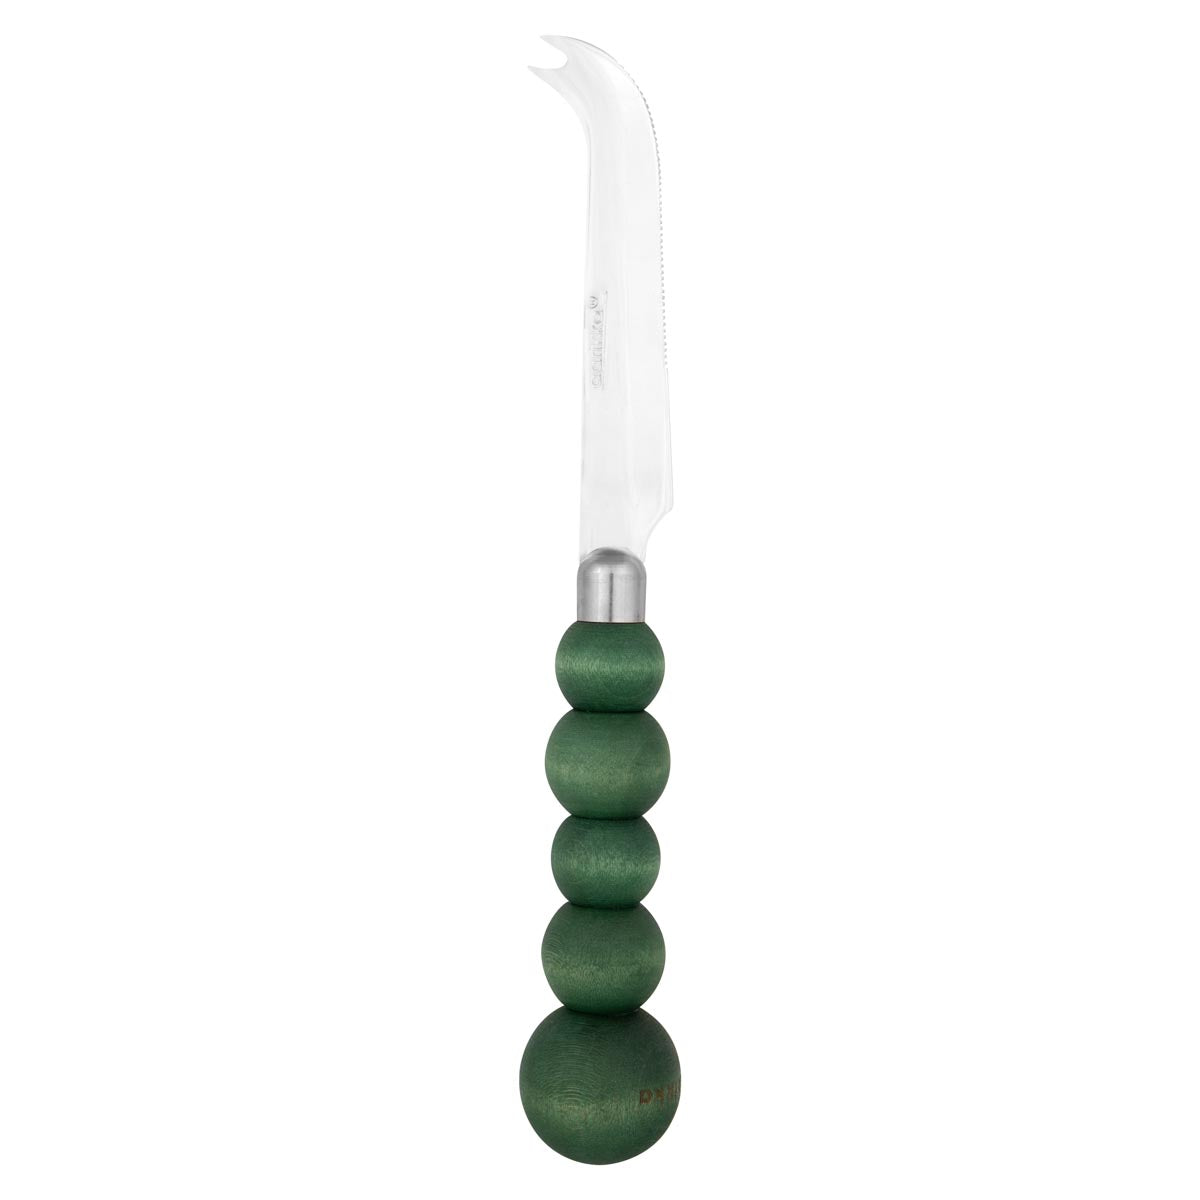 Puisto cheese knife, green